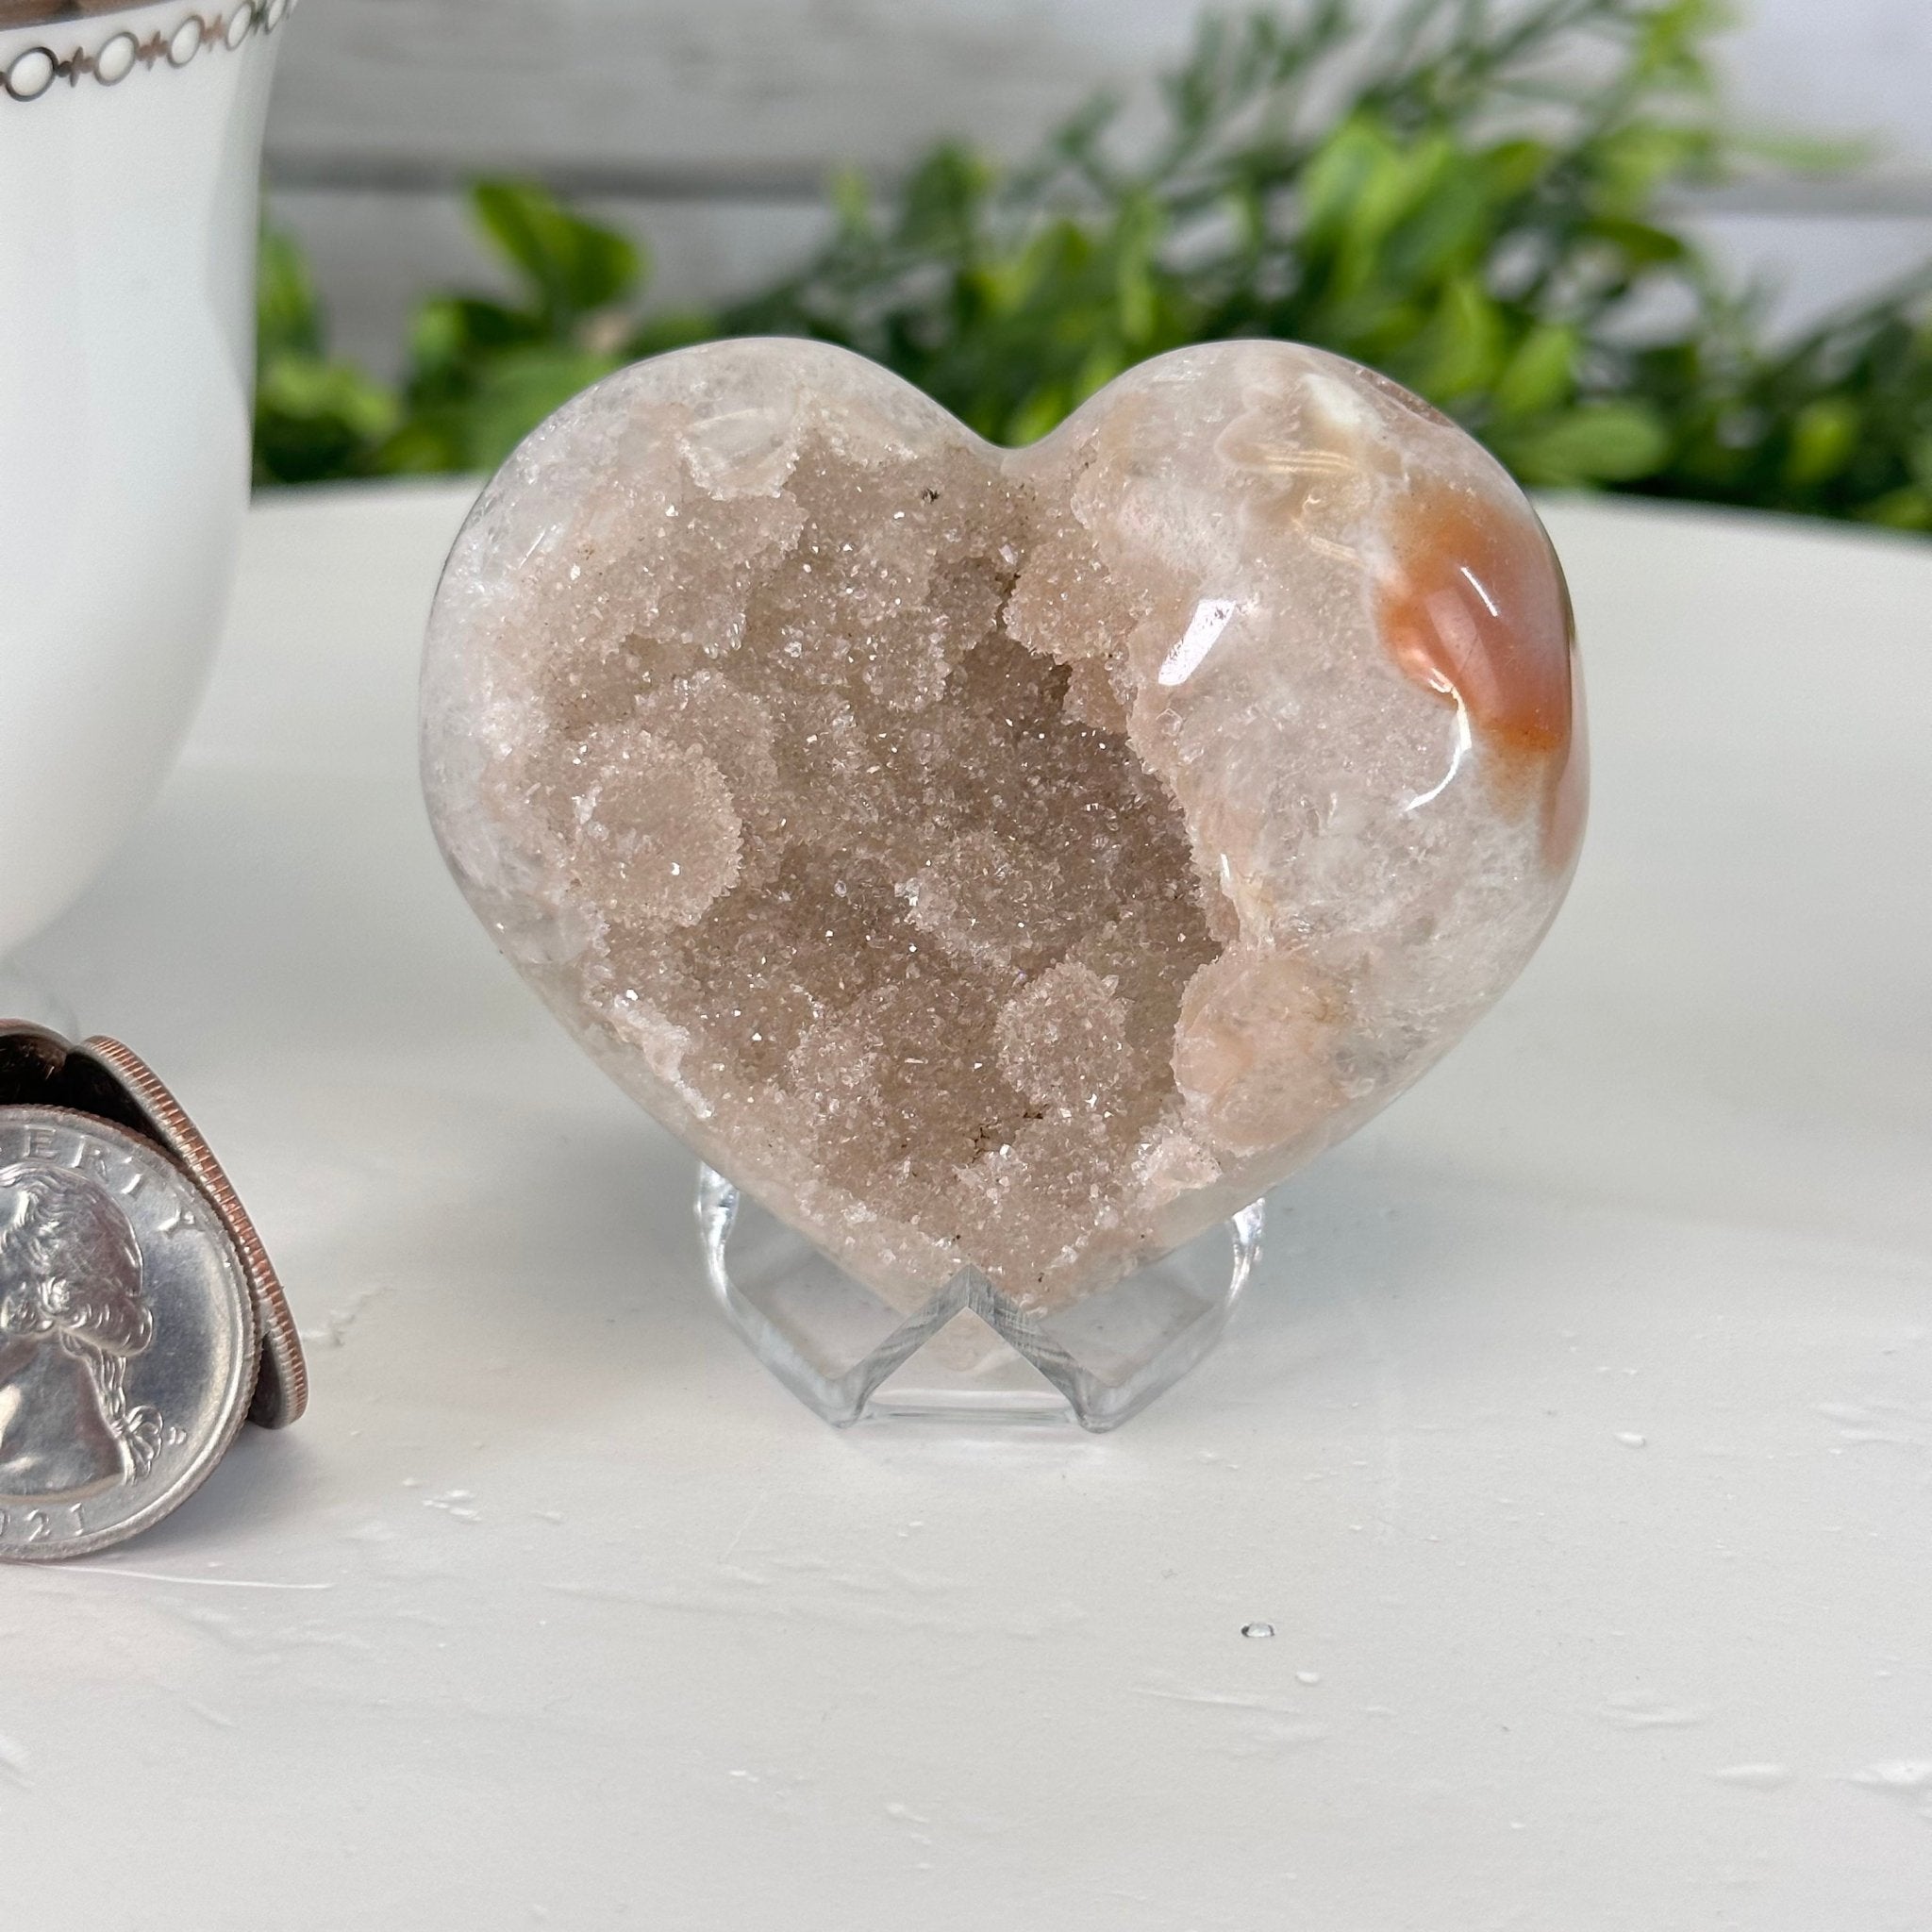 Extra Quality Pink Amethyst Heart Geode on an Acrylic Stand, 0.36 lbs & 2.25" Tall #5462-0081 by Brazil Gems - Brazil GemsBrazil GemsExtra Quality Pink Amethyst Heart Geode on an Acrylic Stand, 0.36 lbs & 2.25" Tall #5462-0081 by Brazil GemsHearts5462-0081